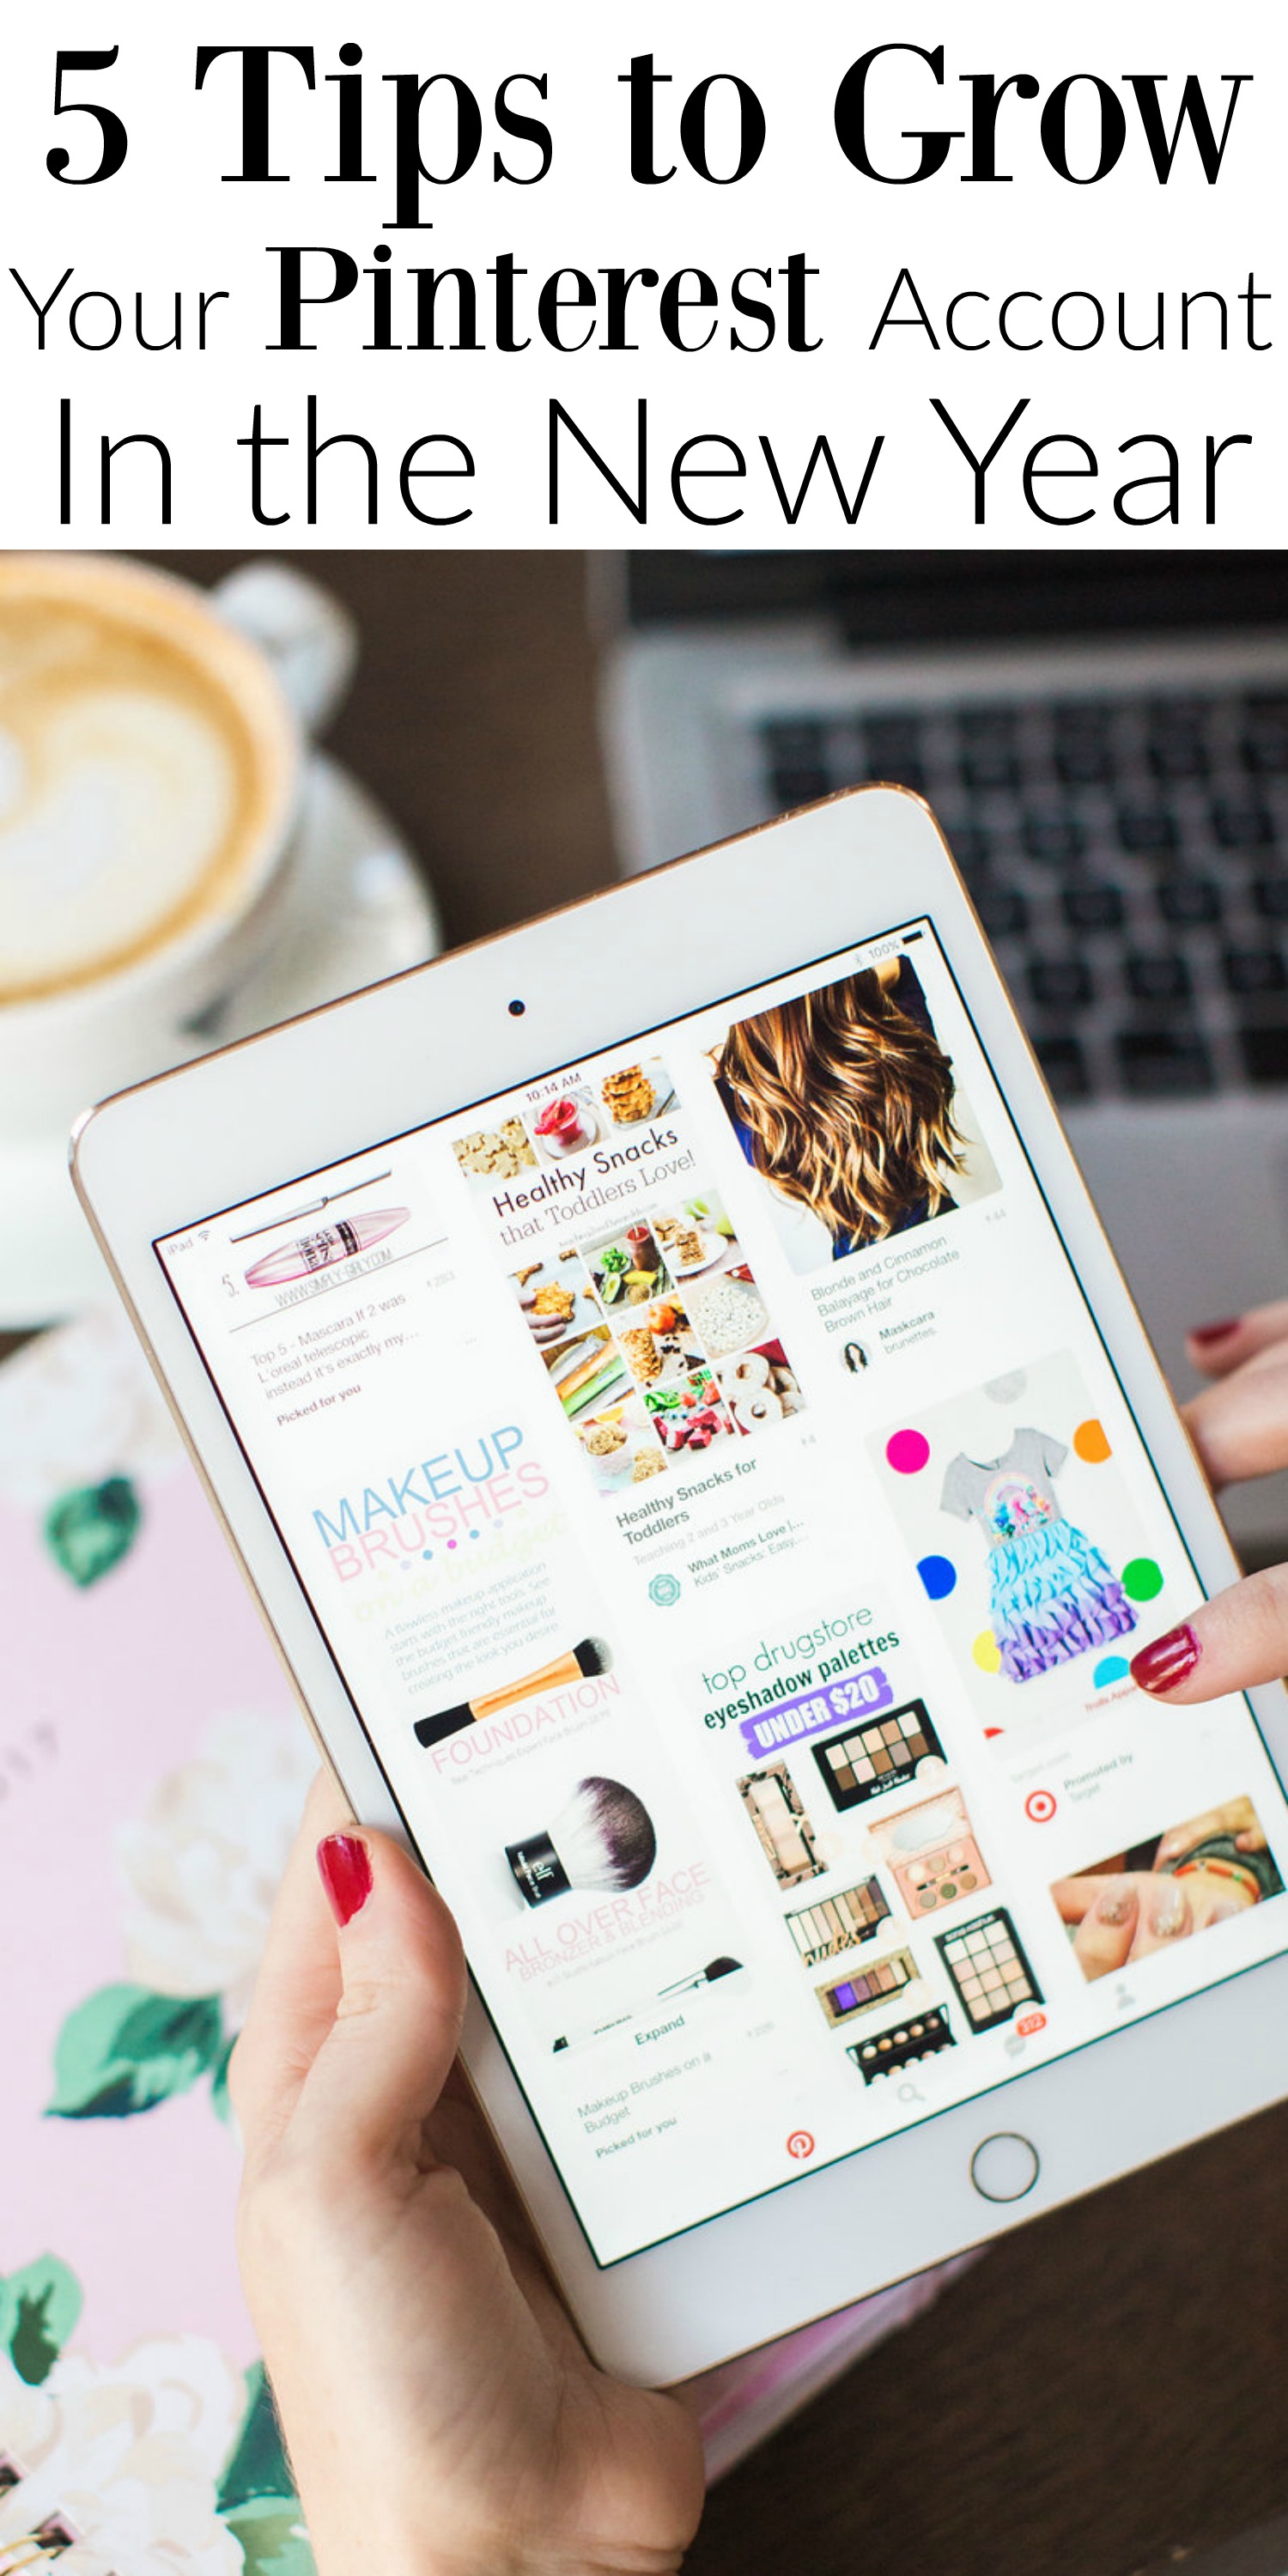 5 Tips to Grown Your Pinterest Account in the New Year